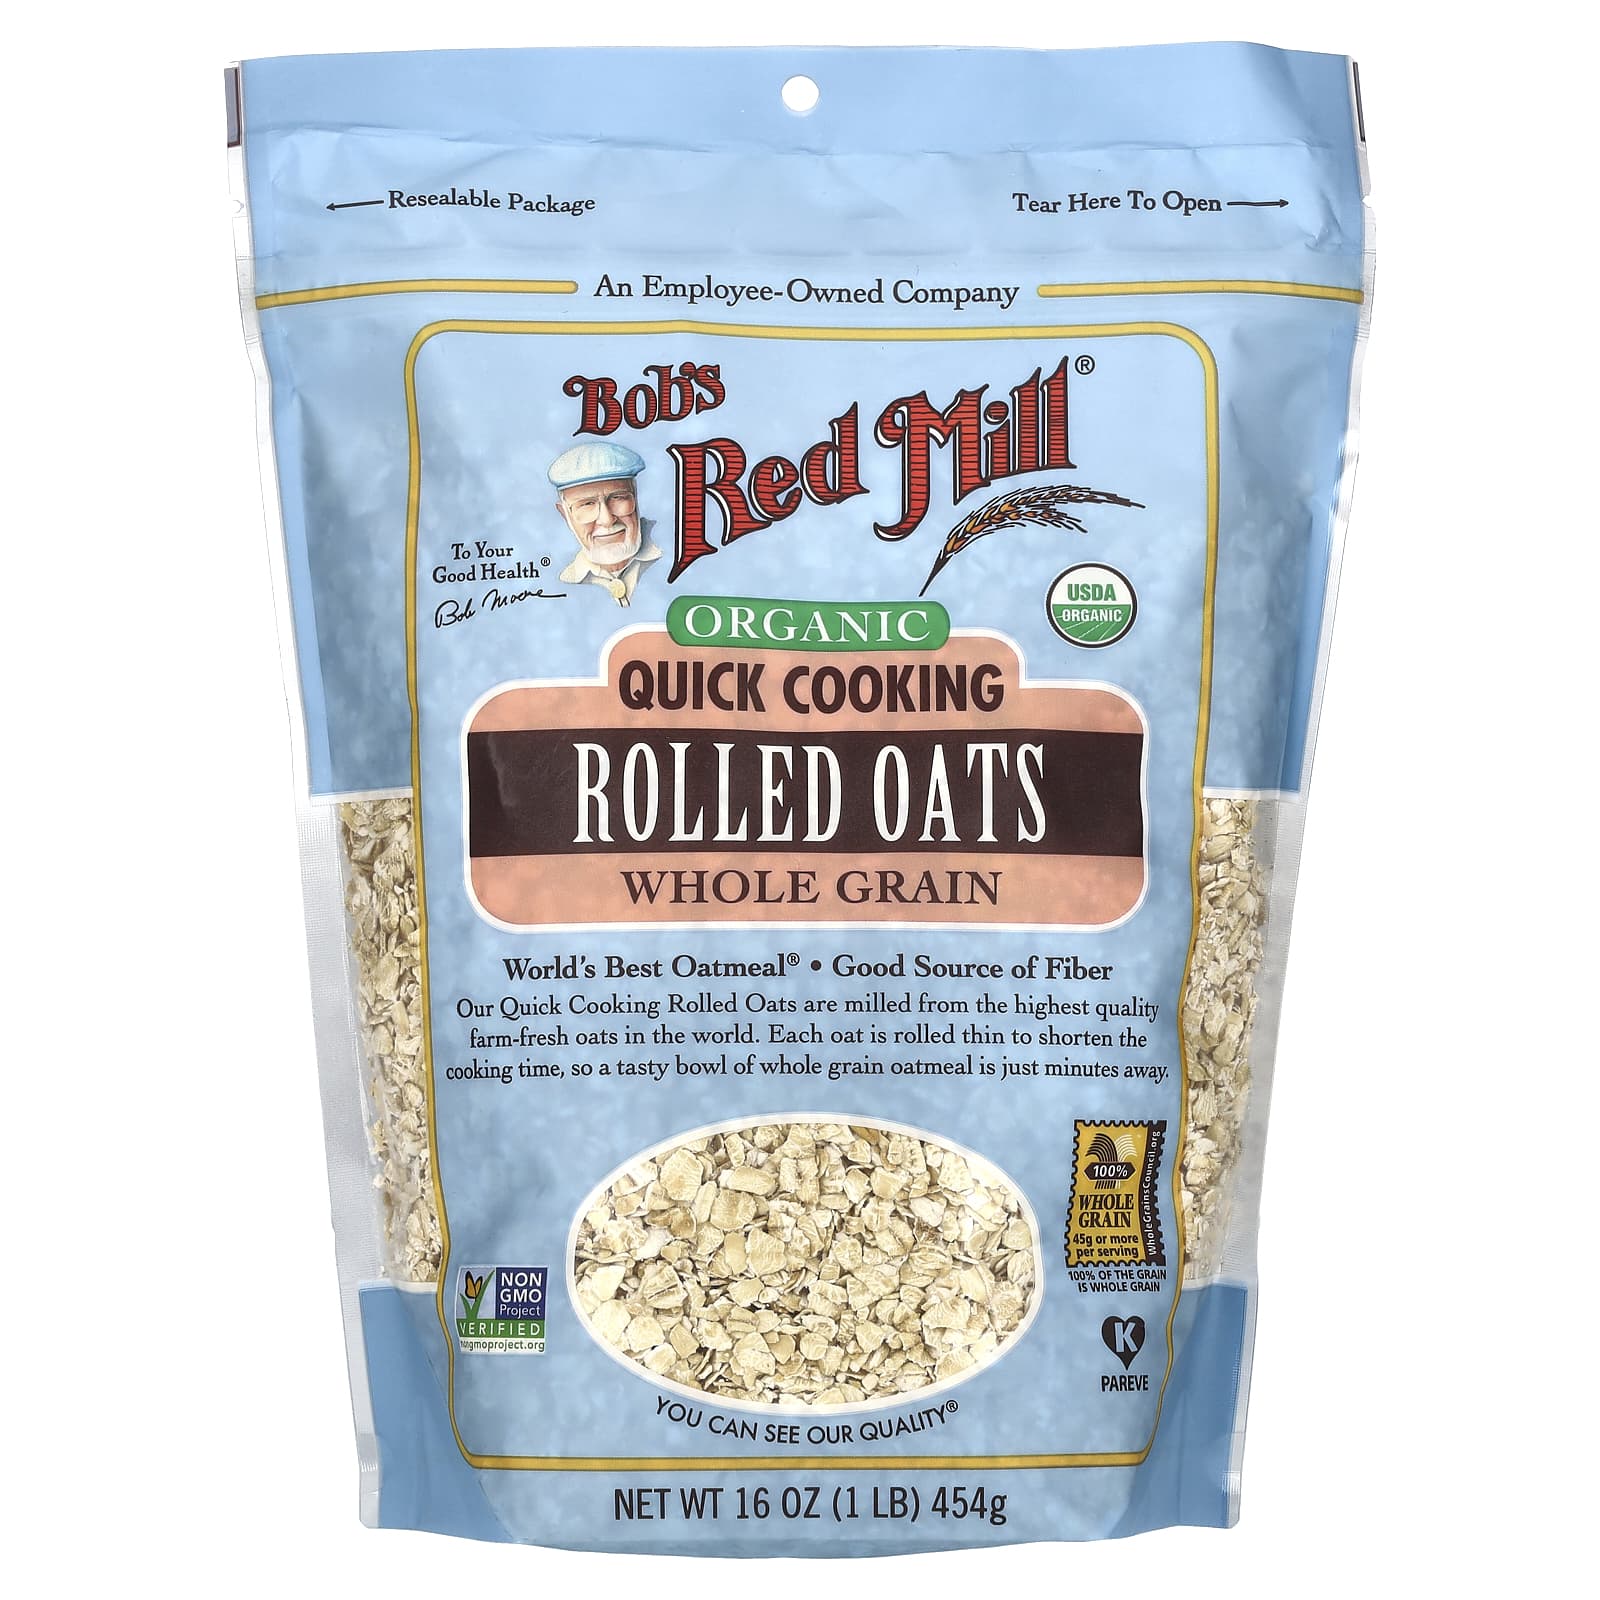 Organic Quick Cooking Rolled Oats, Whole Grain, 16 oz (454 g)